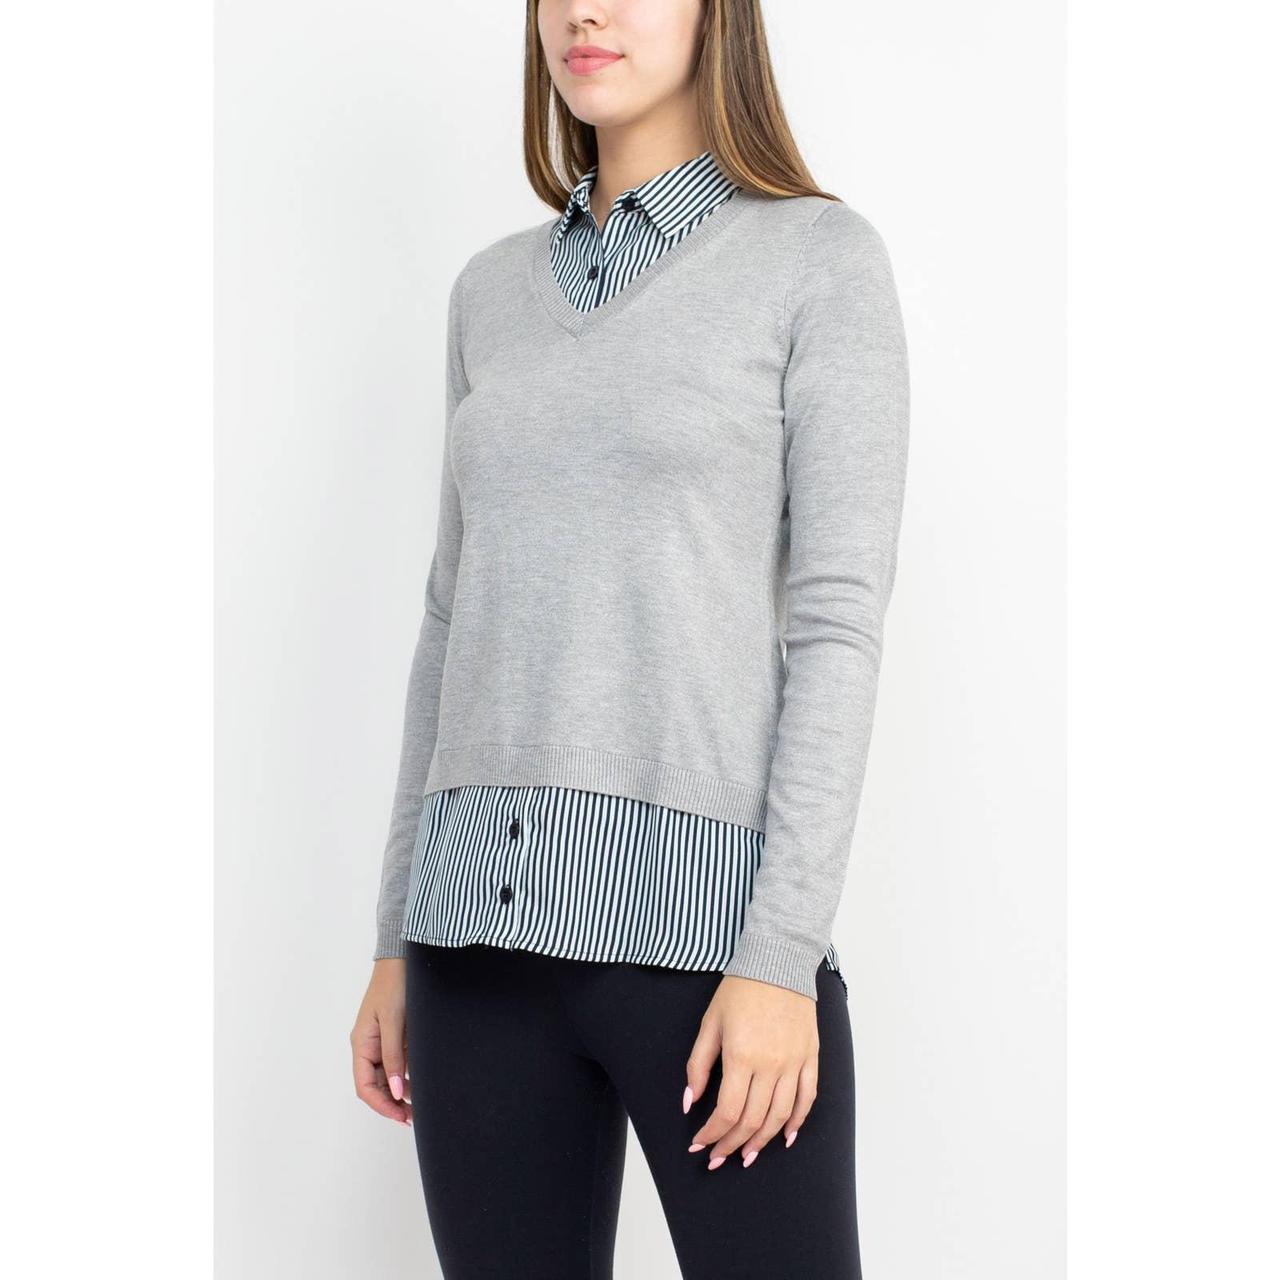 Adrianna Papell Women's Grey and White Jumper